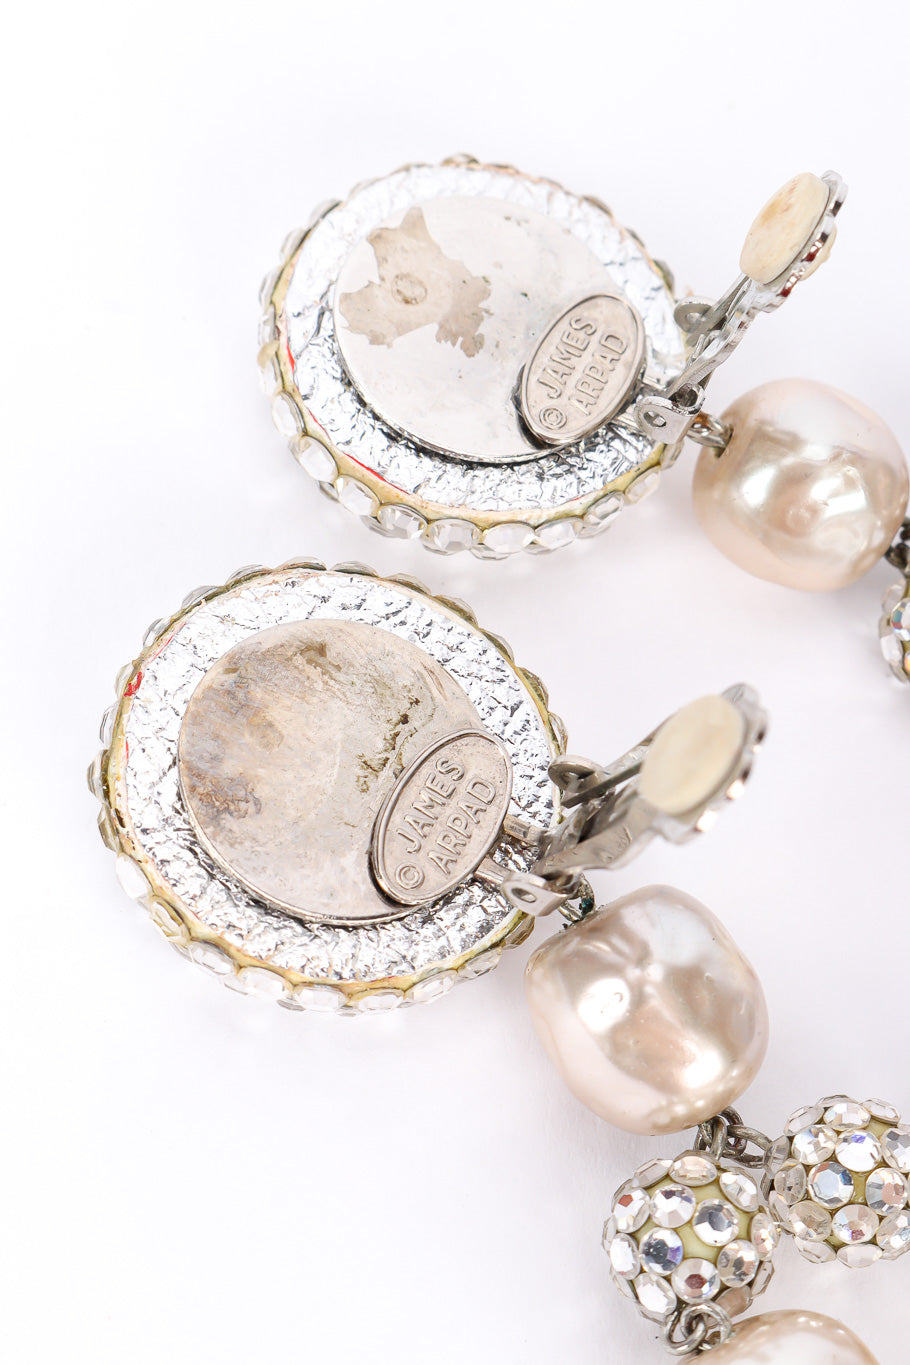 Pearl drop earrings by James Arpad on white background carotuches @recessla